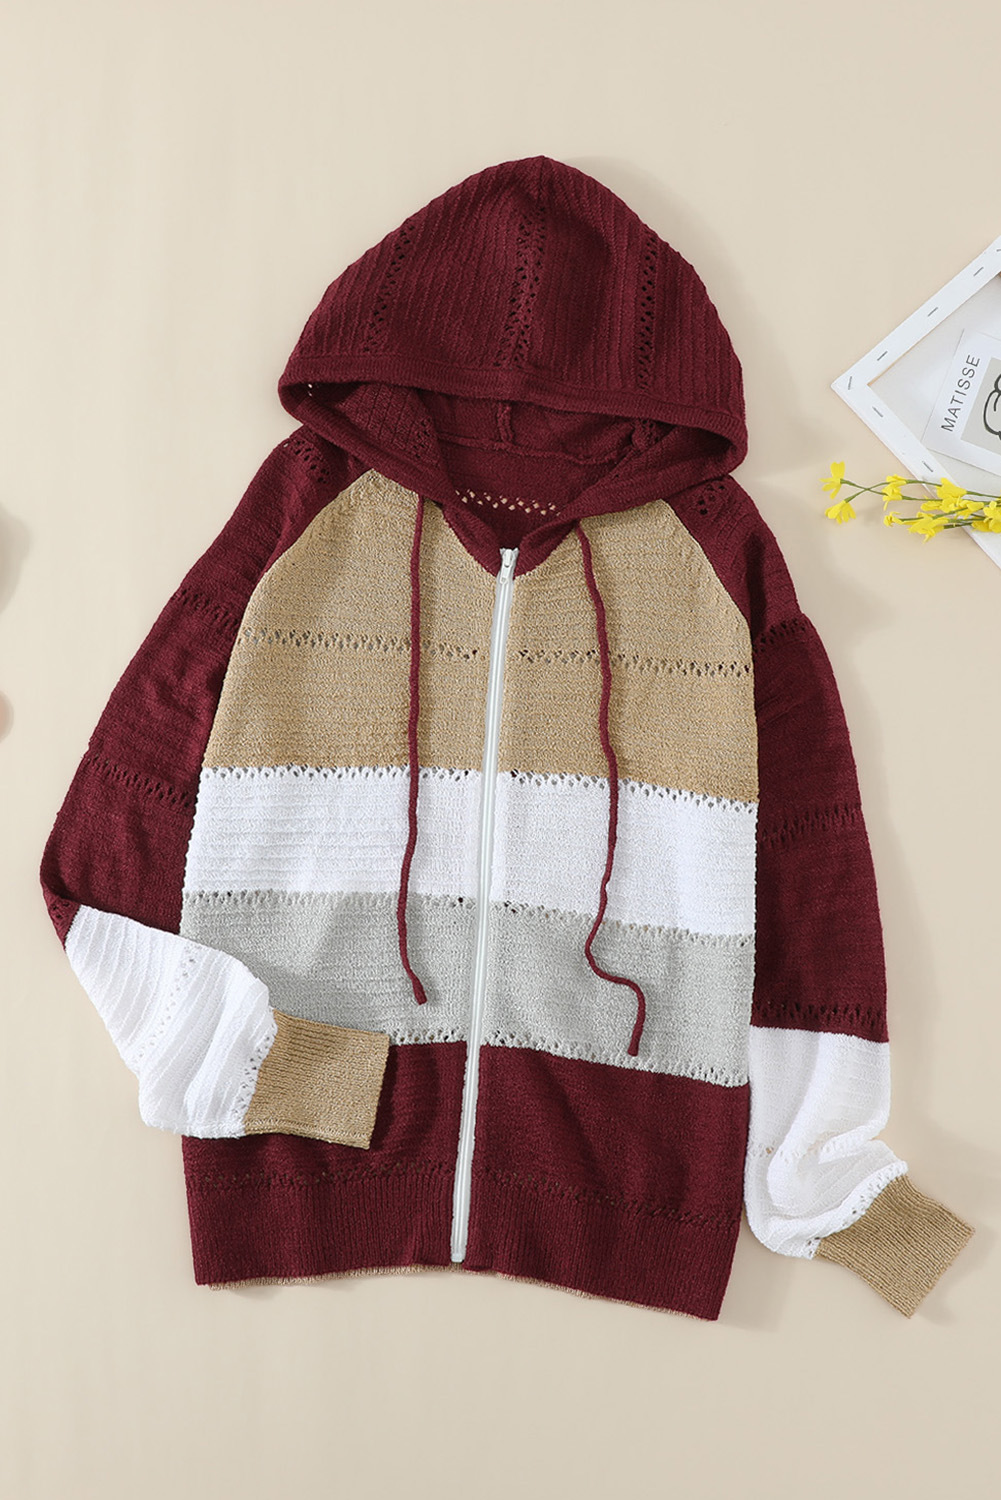 contrast color slim hooded knit sweater coat nihaostyles wholesale clothing NSQSY87002